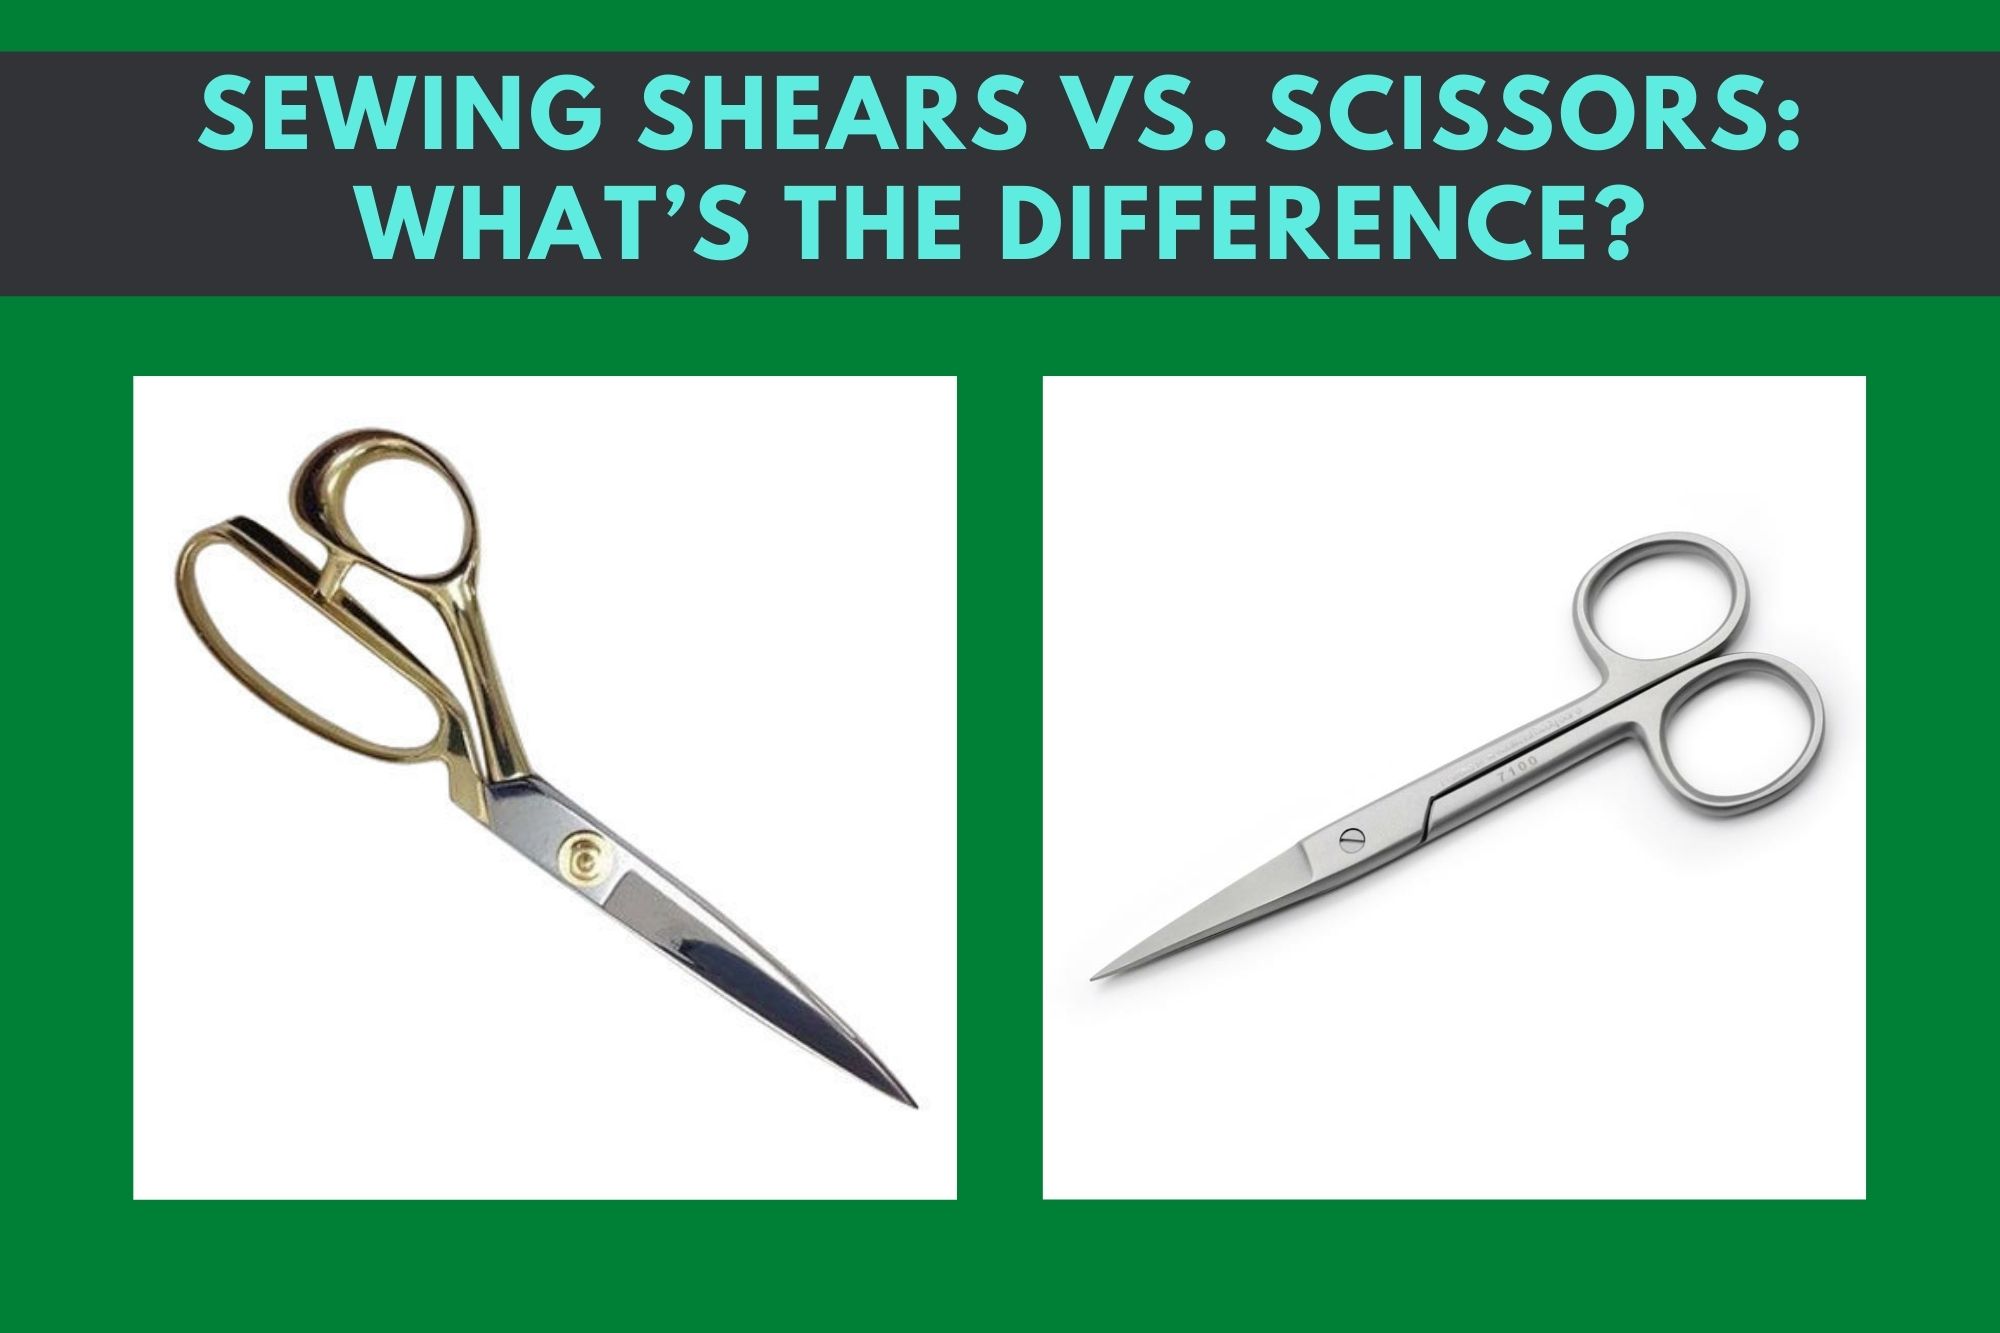 Sewing Shears Vs. Scissors What Is A Scissor? Pros And Cons Of Using Scissors What Is A Sewing Shear? Pros And Cons Of Using Sewing Shears What Is The Difference Between The Structure Of Sewing Shears And Scissors? What Is The Difference Between The Sizes of Sewing Shears And Scissors? What Happens If You Use Sewing Shears In Household Use?